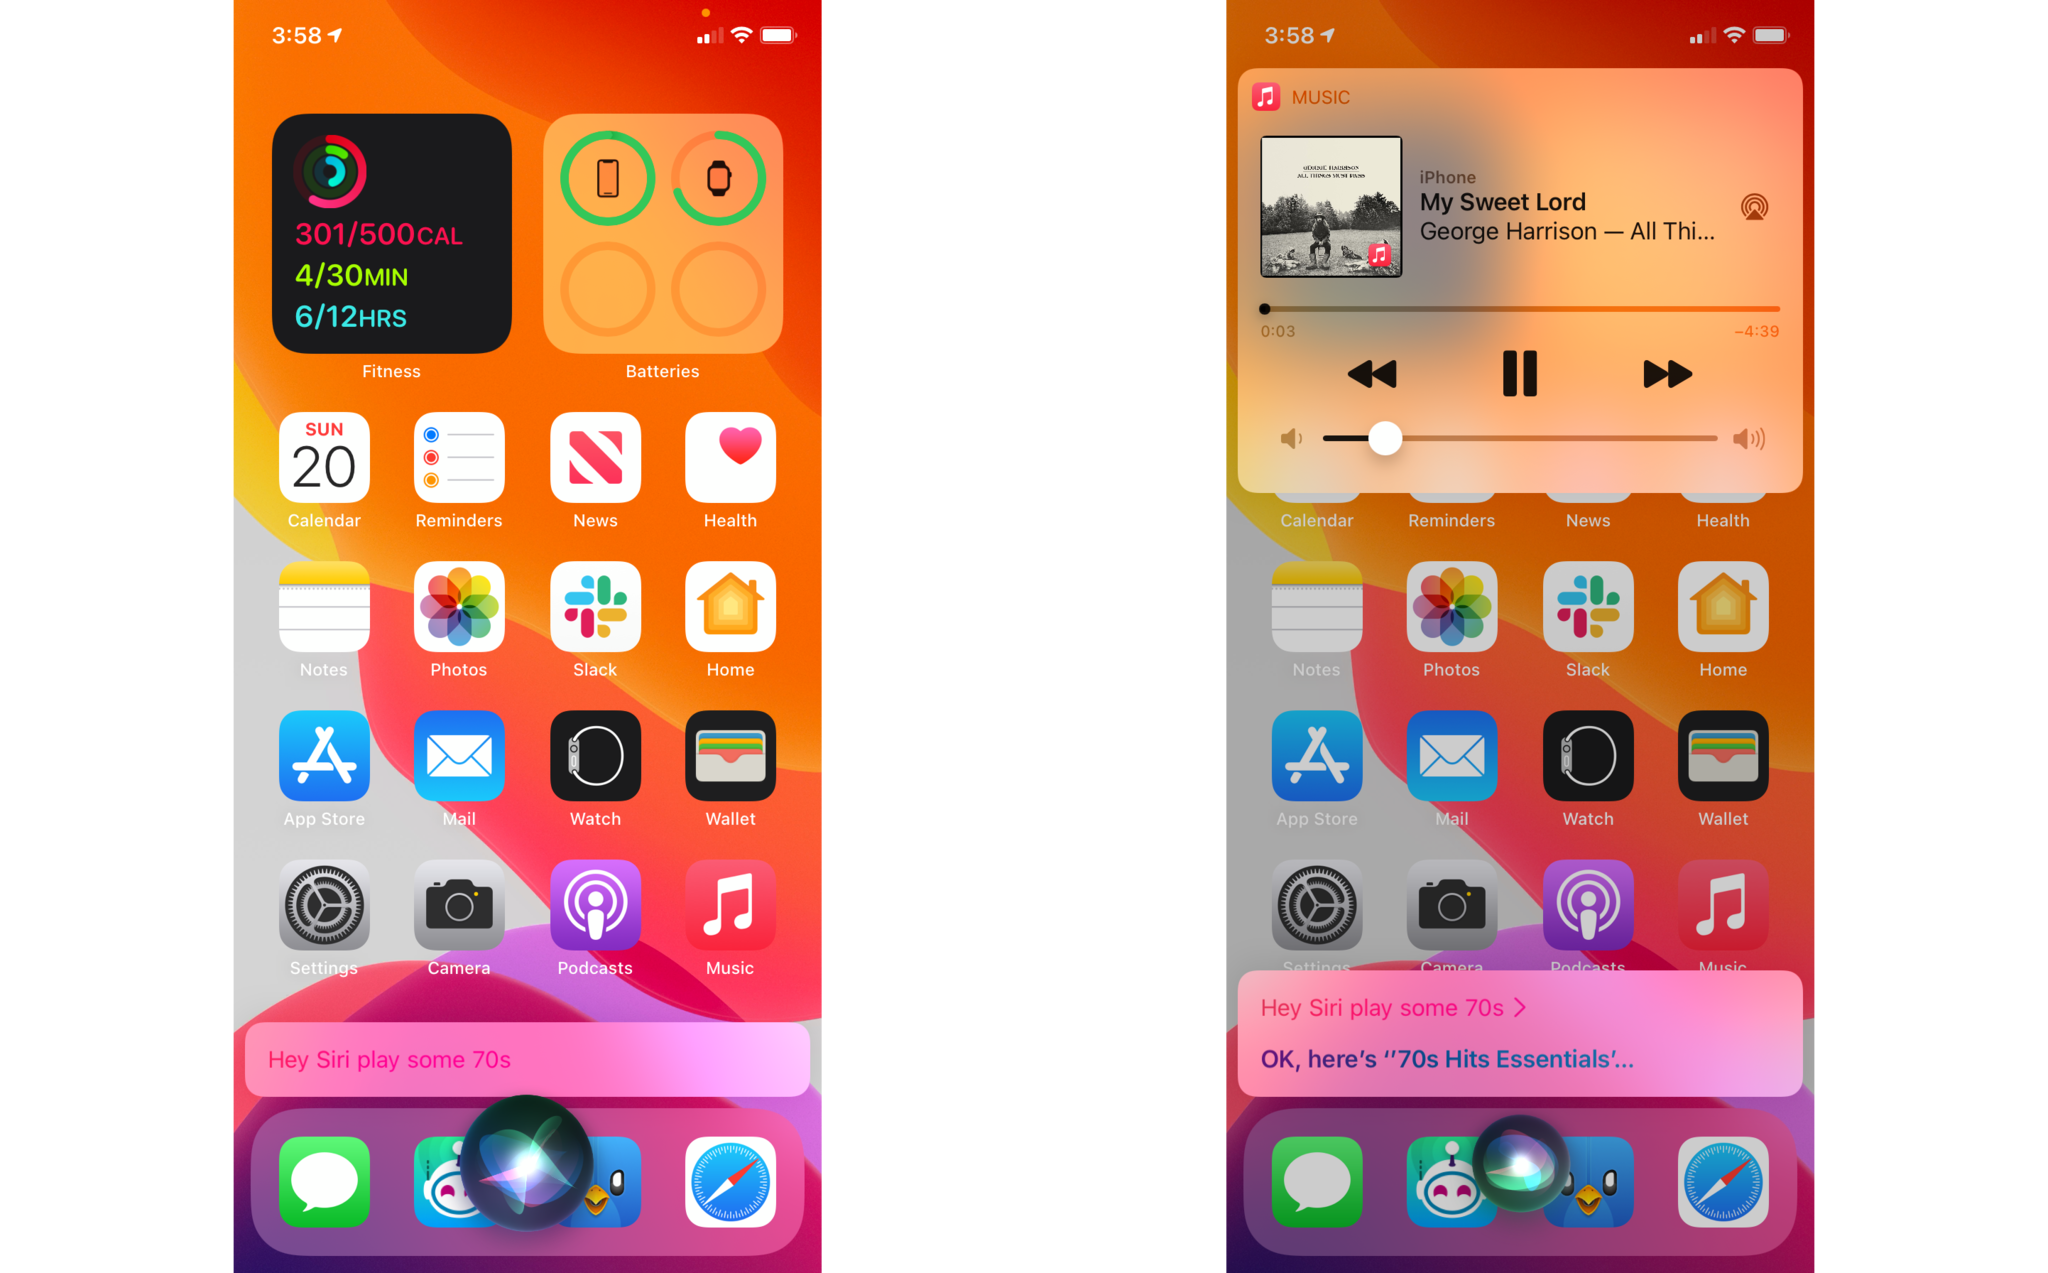 How to use Siri to find and listen to music on HomePod and HomePod mini by showing steps on an iPhone: Give a command like "Hey Siri, play some 70s"